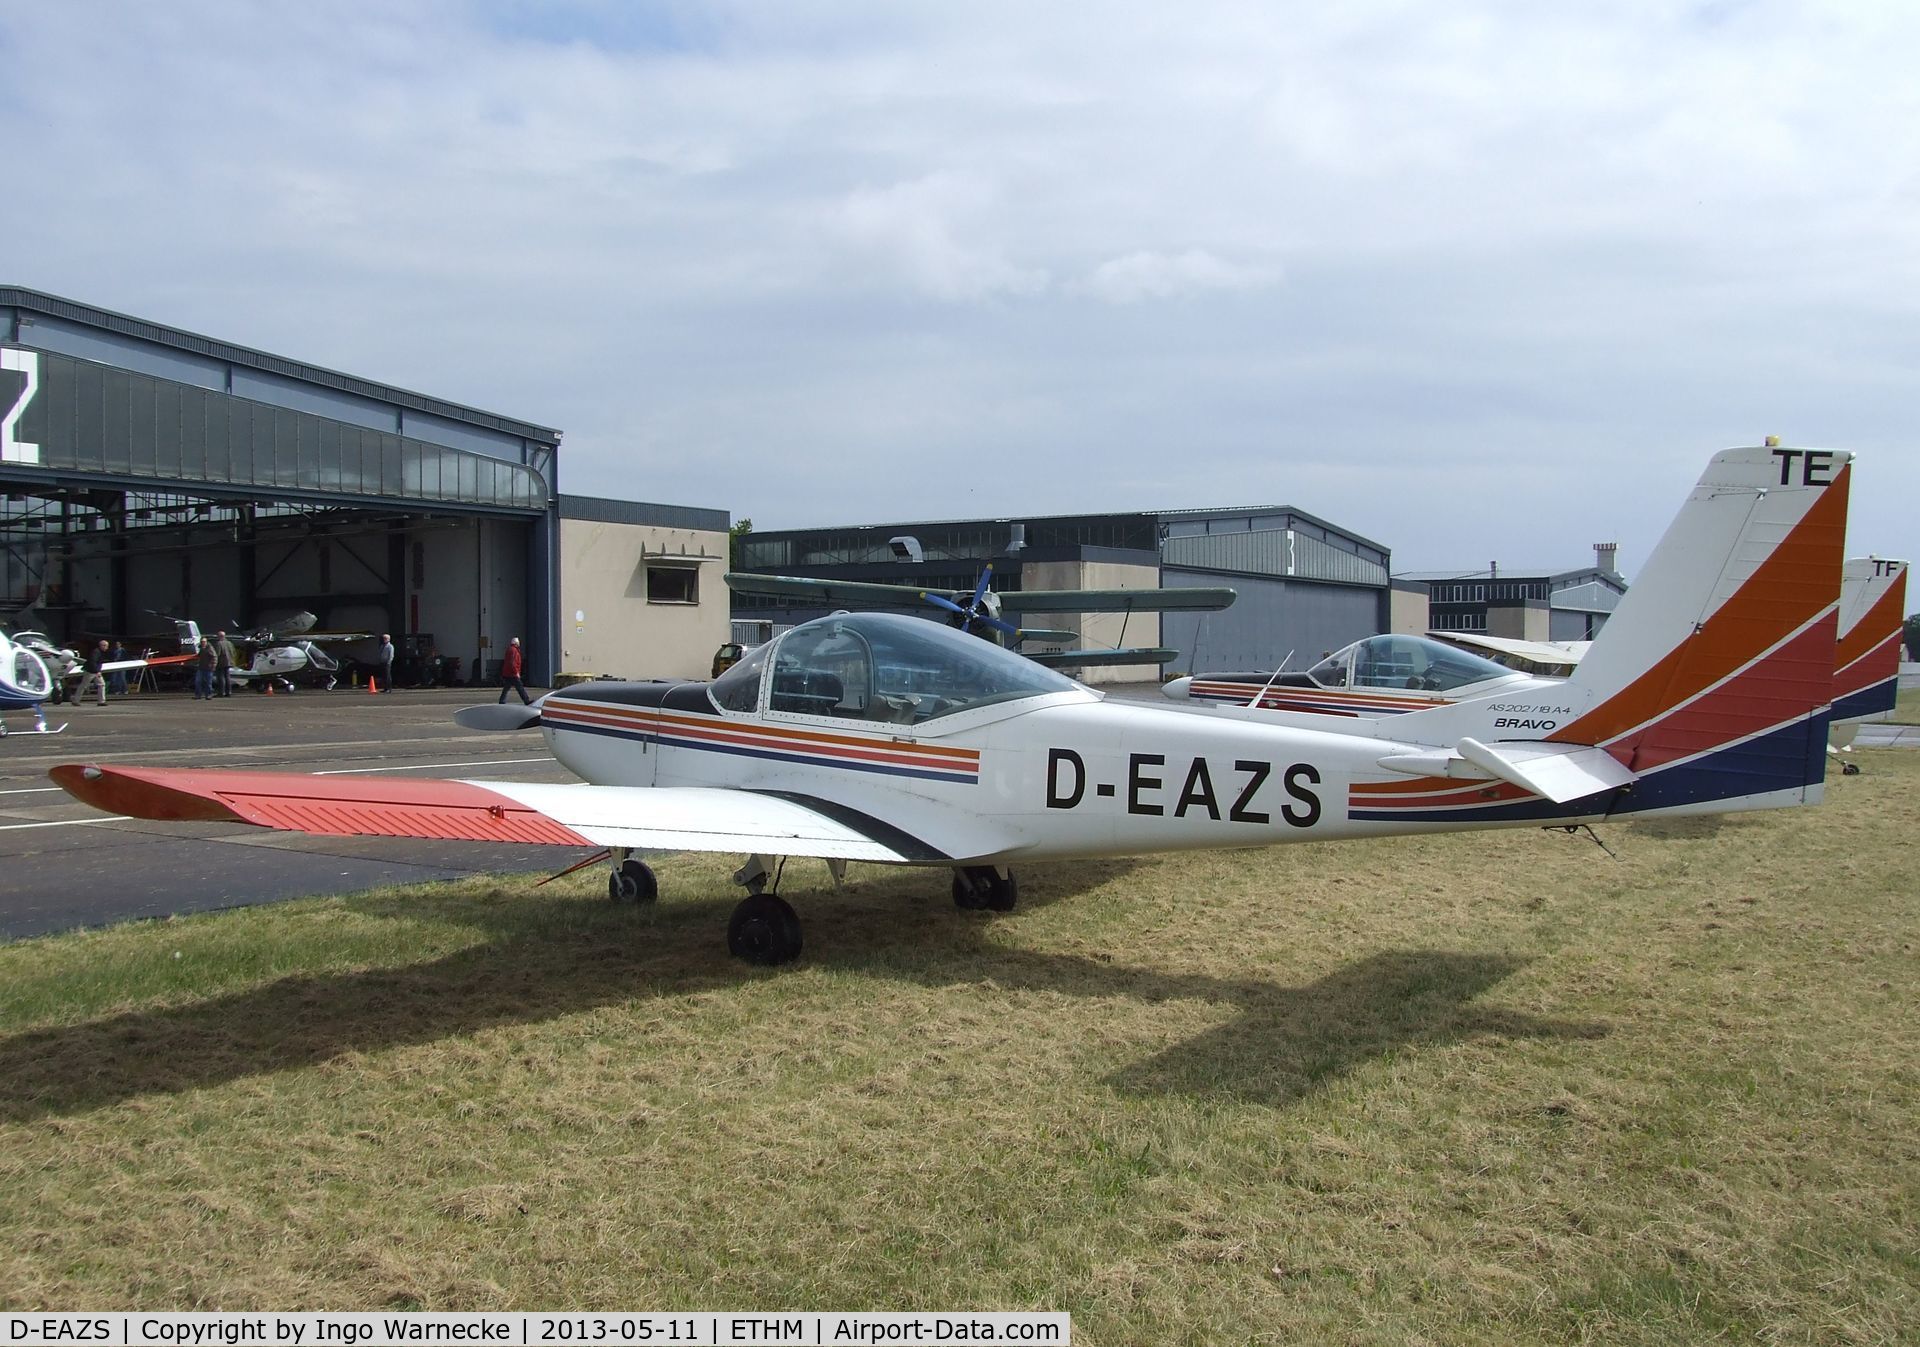 D-EAZS, 1987 FFA AS-202/18A-4 Bravo C/N 224, FFA AS.202/18 A4 Bravo during an open day at the Fliegendes Museum Mendig (Flying Museum) at former German Army Aviation base, now civilian Mendig airfield